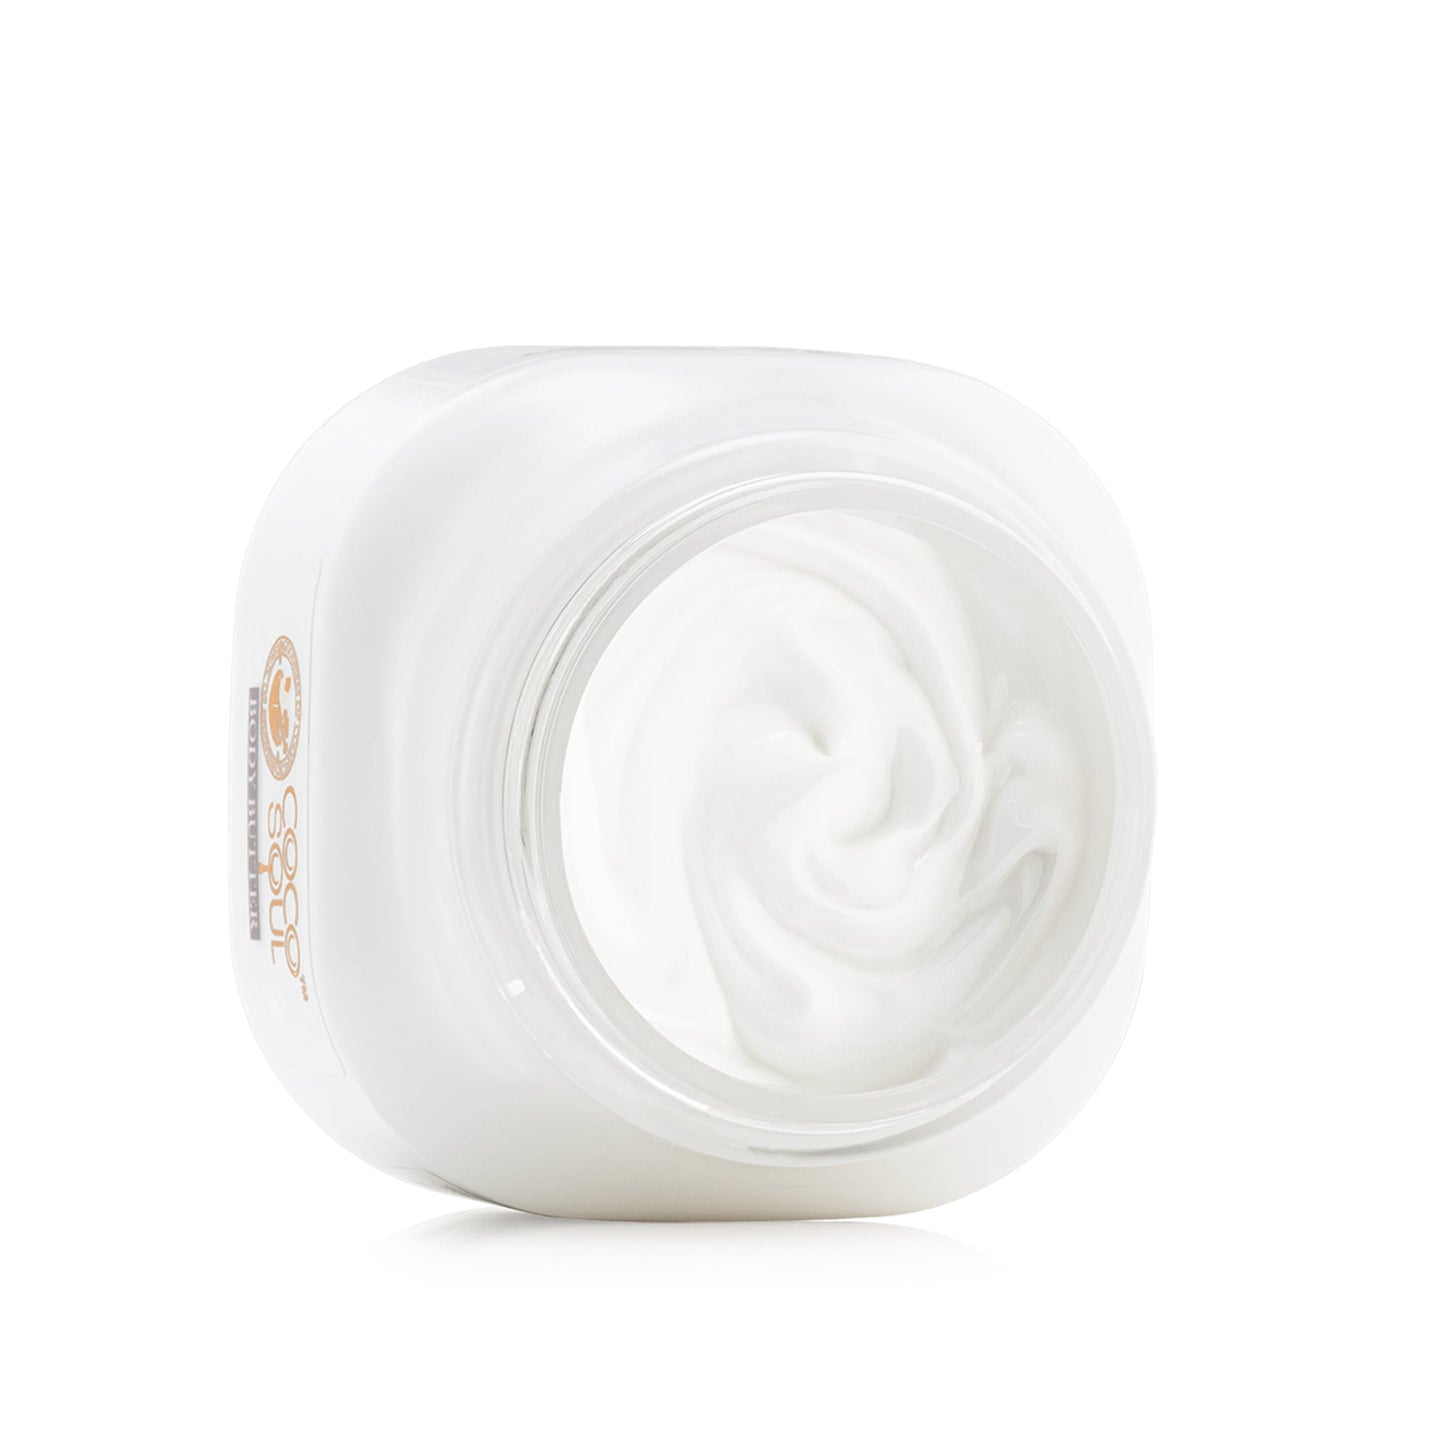 AFF Body Butter  From the makers of Parachute Advansed  140g